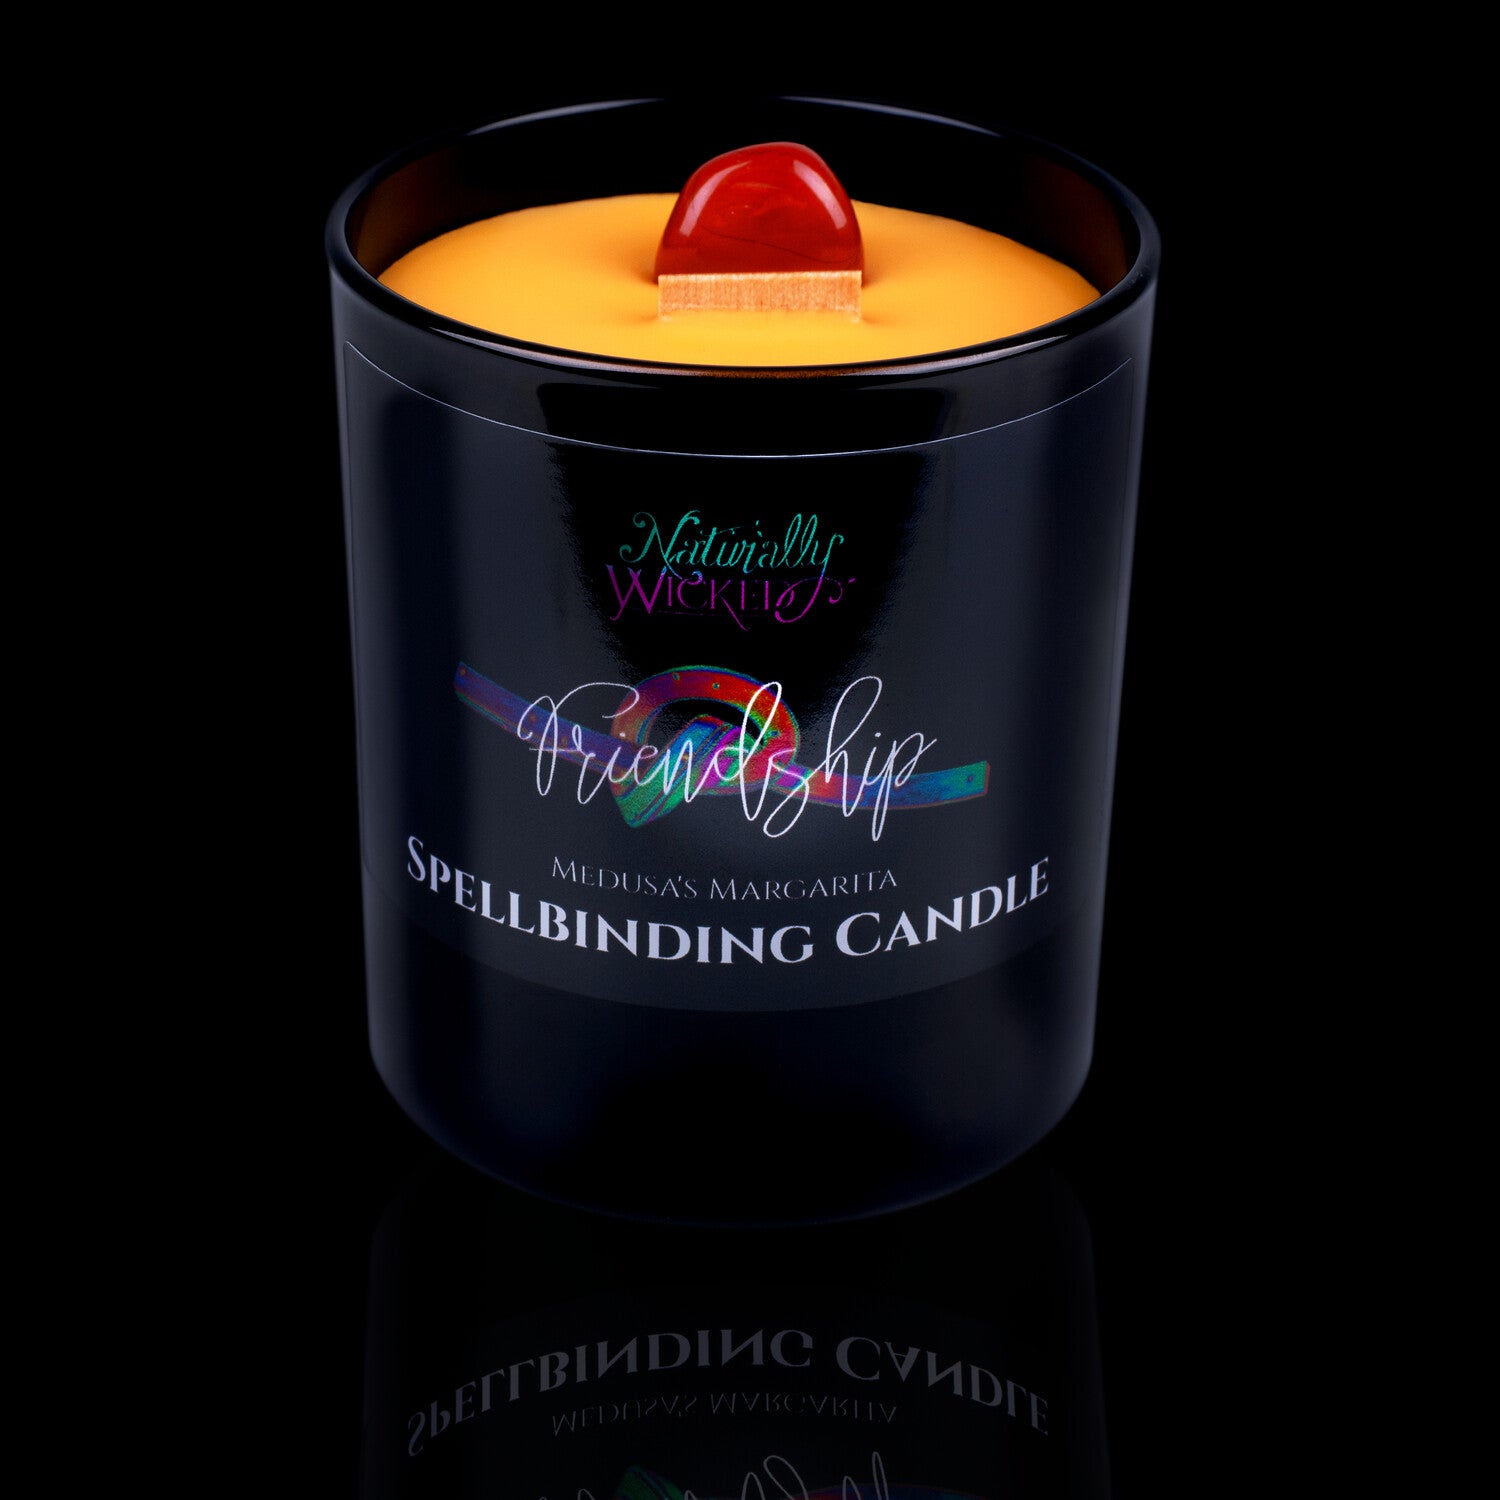 Naturally Wicked Spellbinding Friendship Crystal Candle Entombed In Orange Plant-Based Wax With Crackling Wood Wick & Red Jasper Crystal. Friendship Is The Greatest Gift